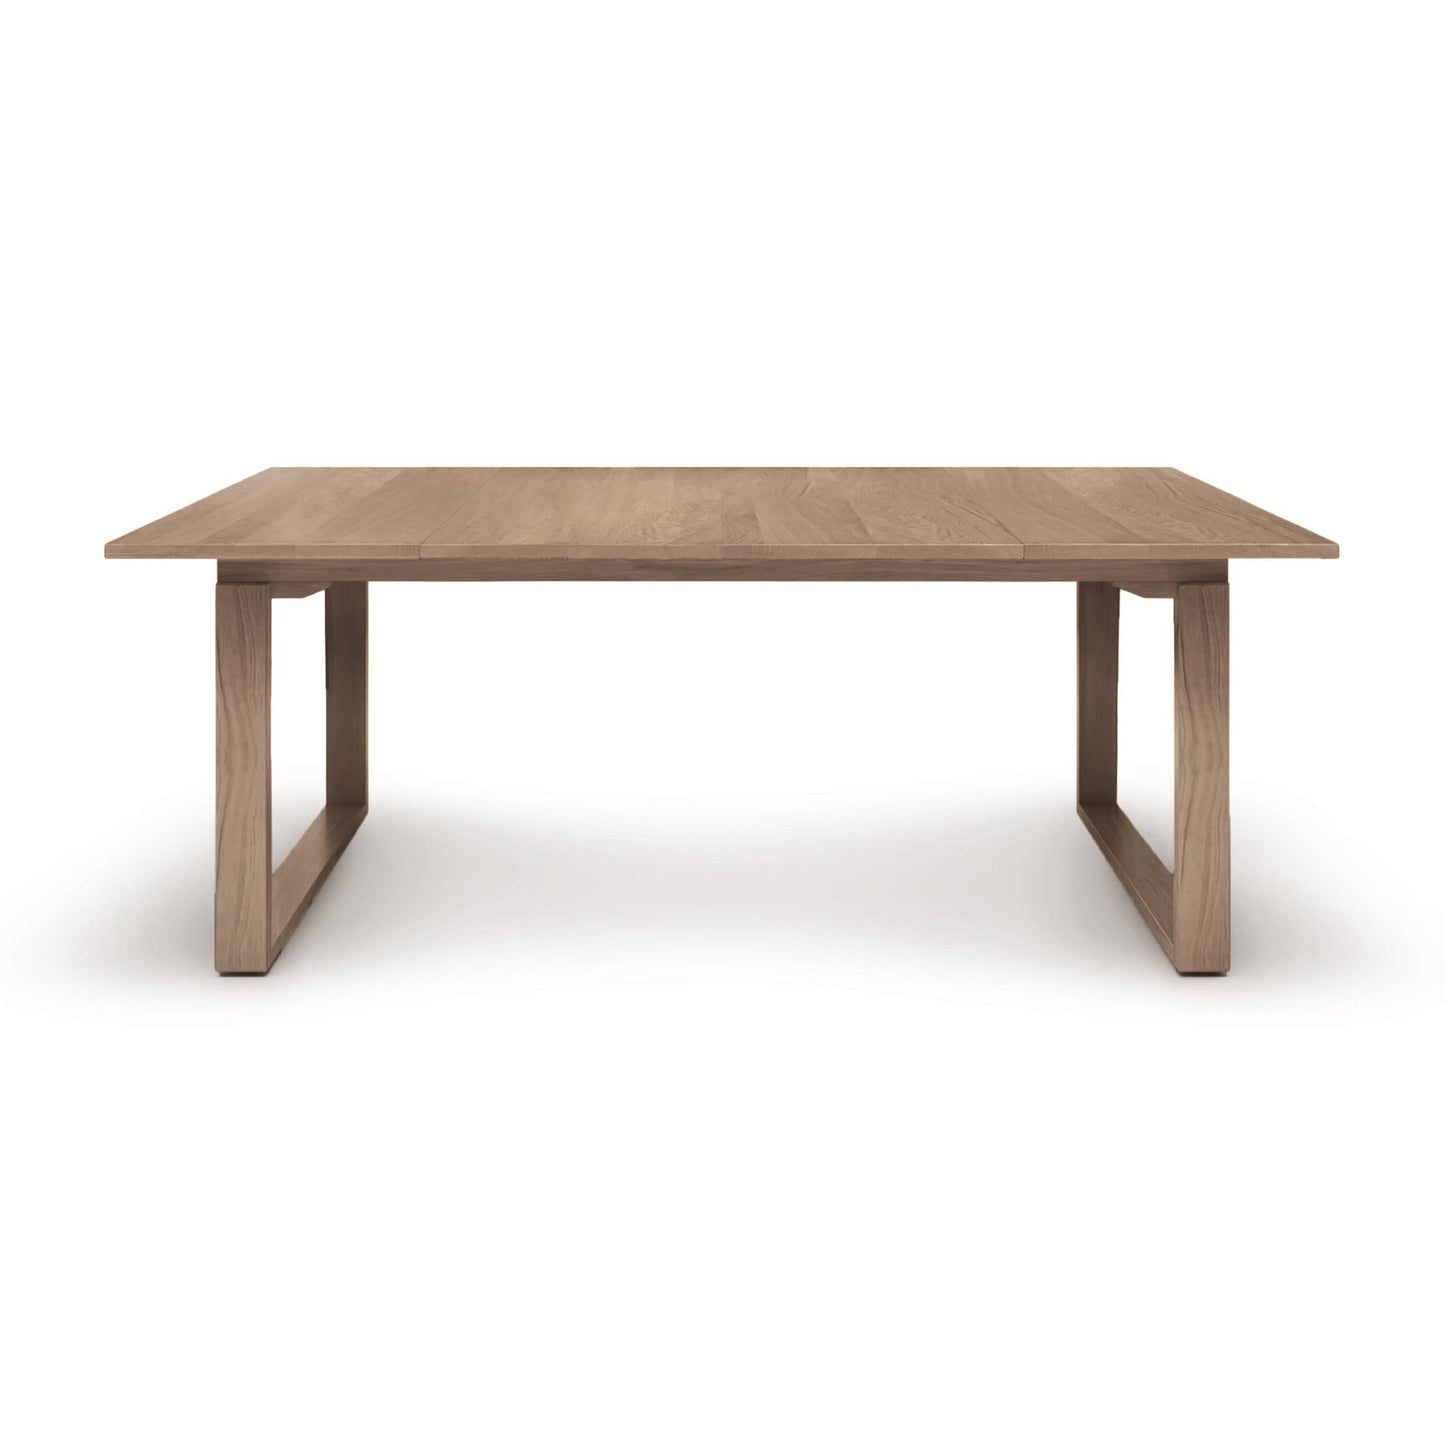 A rectangular Iso Extension Dining Table featuring solid oak wood, on a white background by Copeland Furniture.